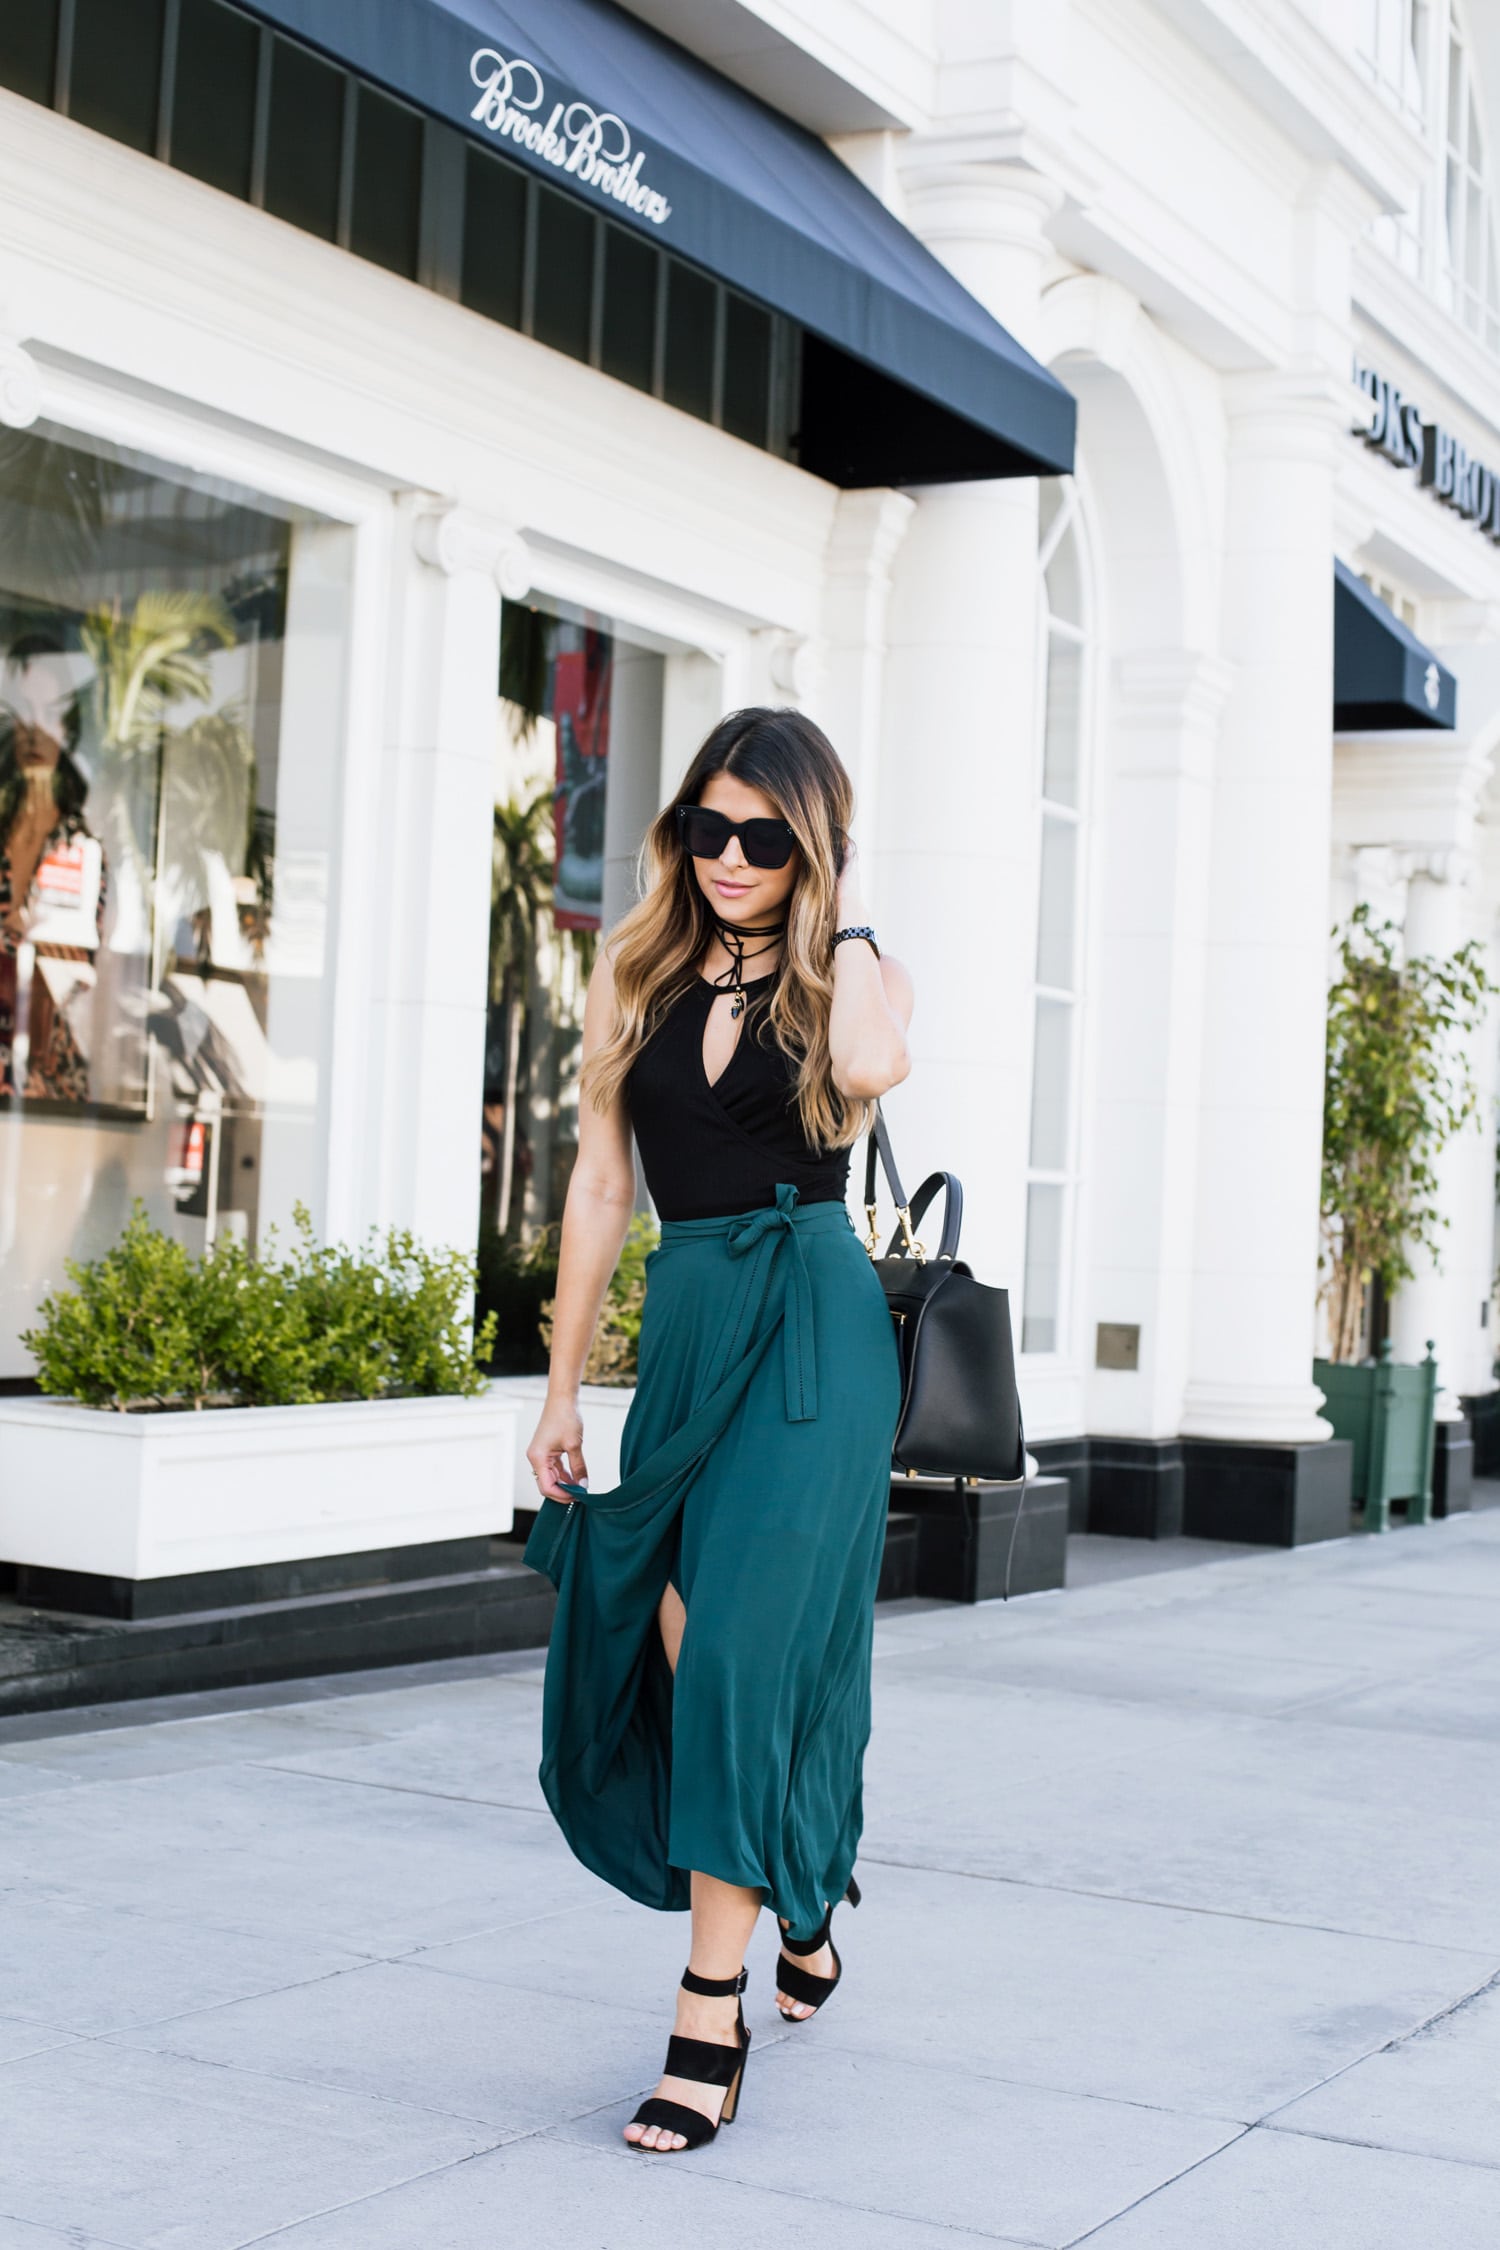 How to style a midi skirt | The Girl From Panama 